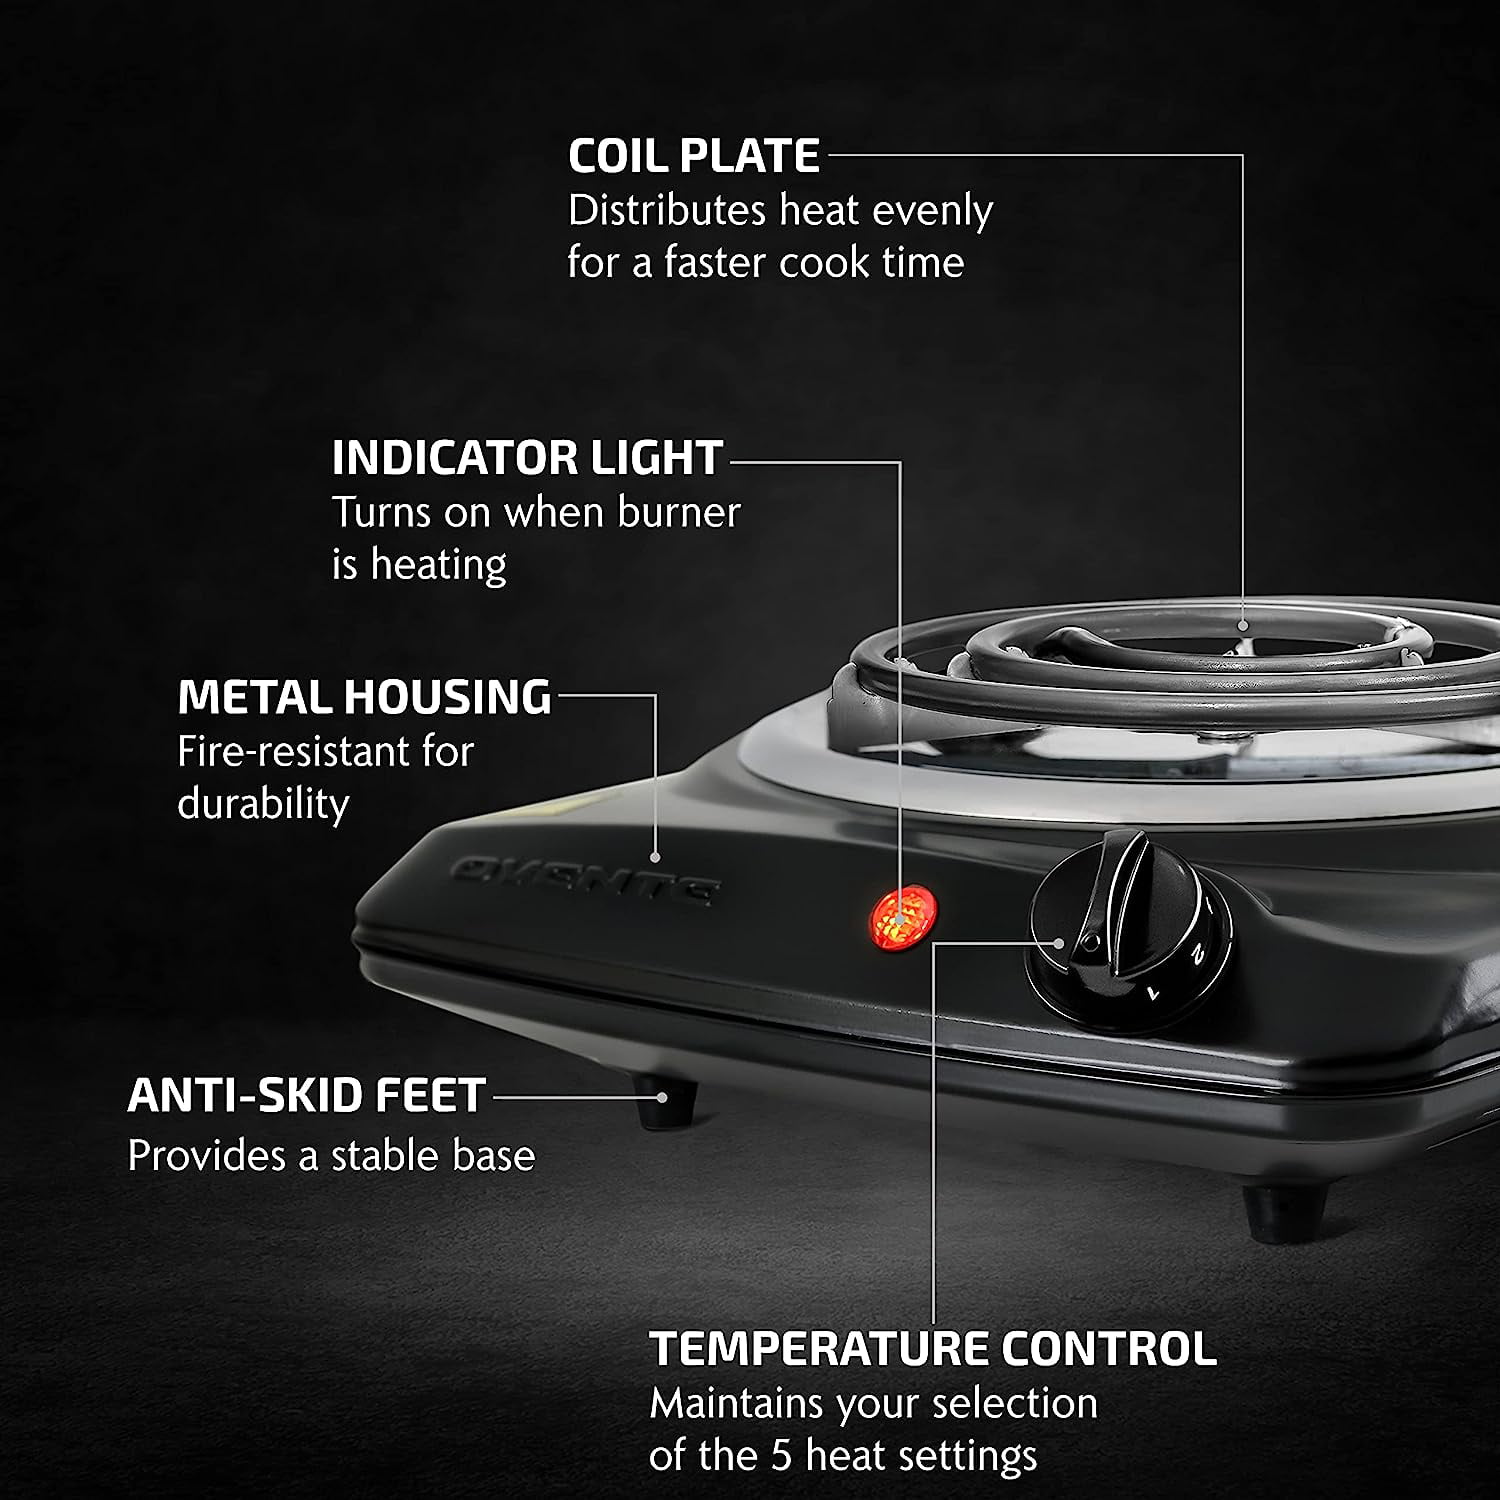 Ovente 1700W Double Hot Plate Electric Cast Iron Burner with 6 7 inch Plates and Temperature Control Silver BGS102S